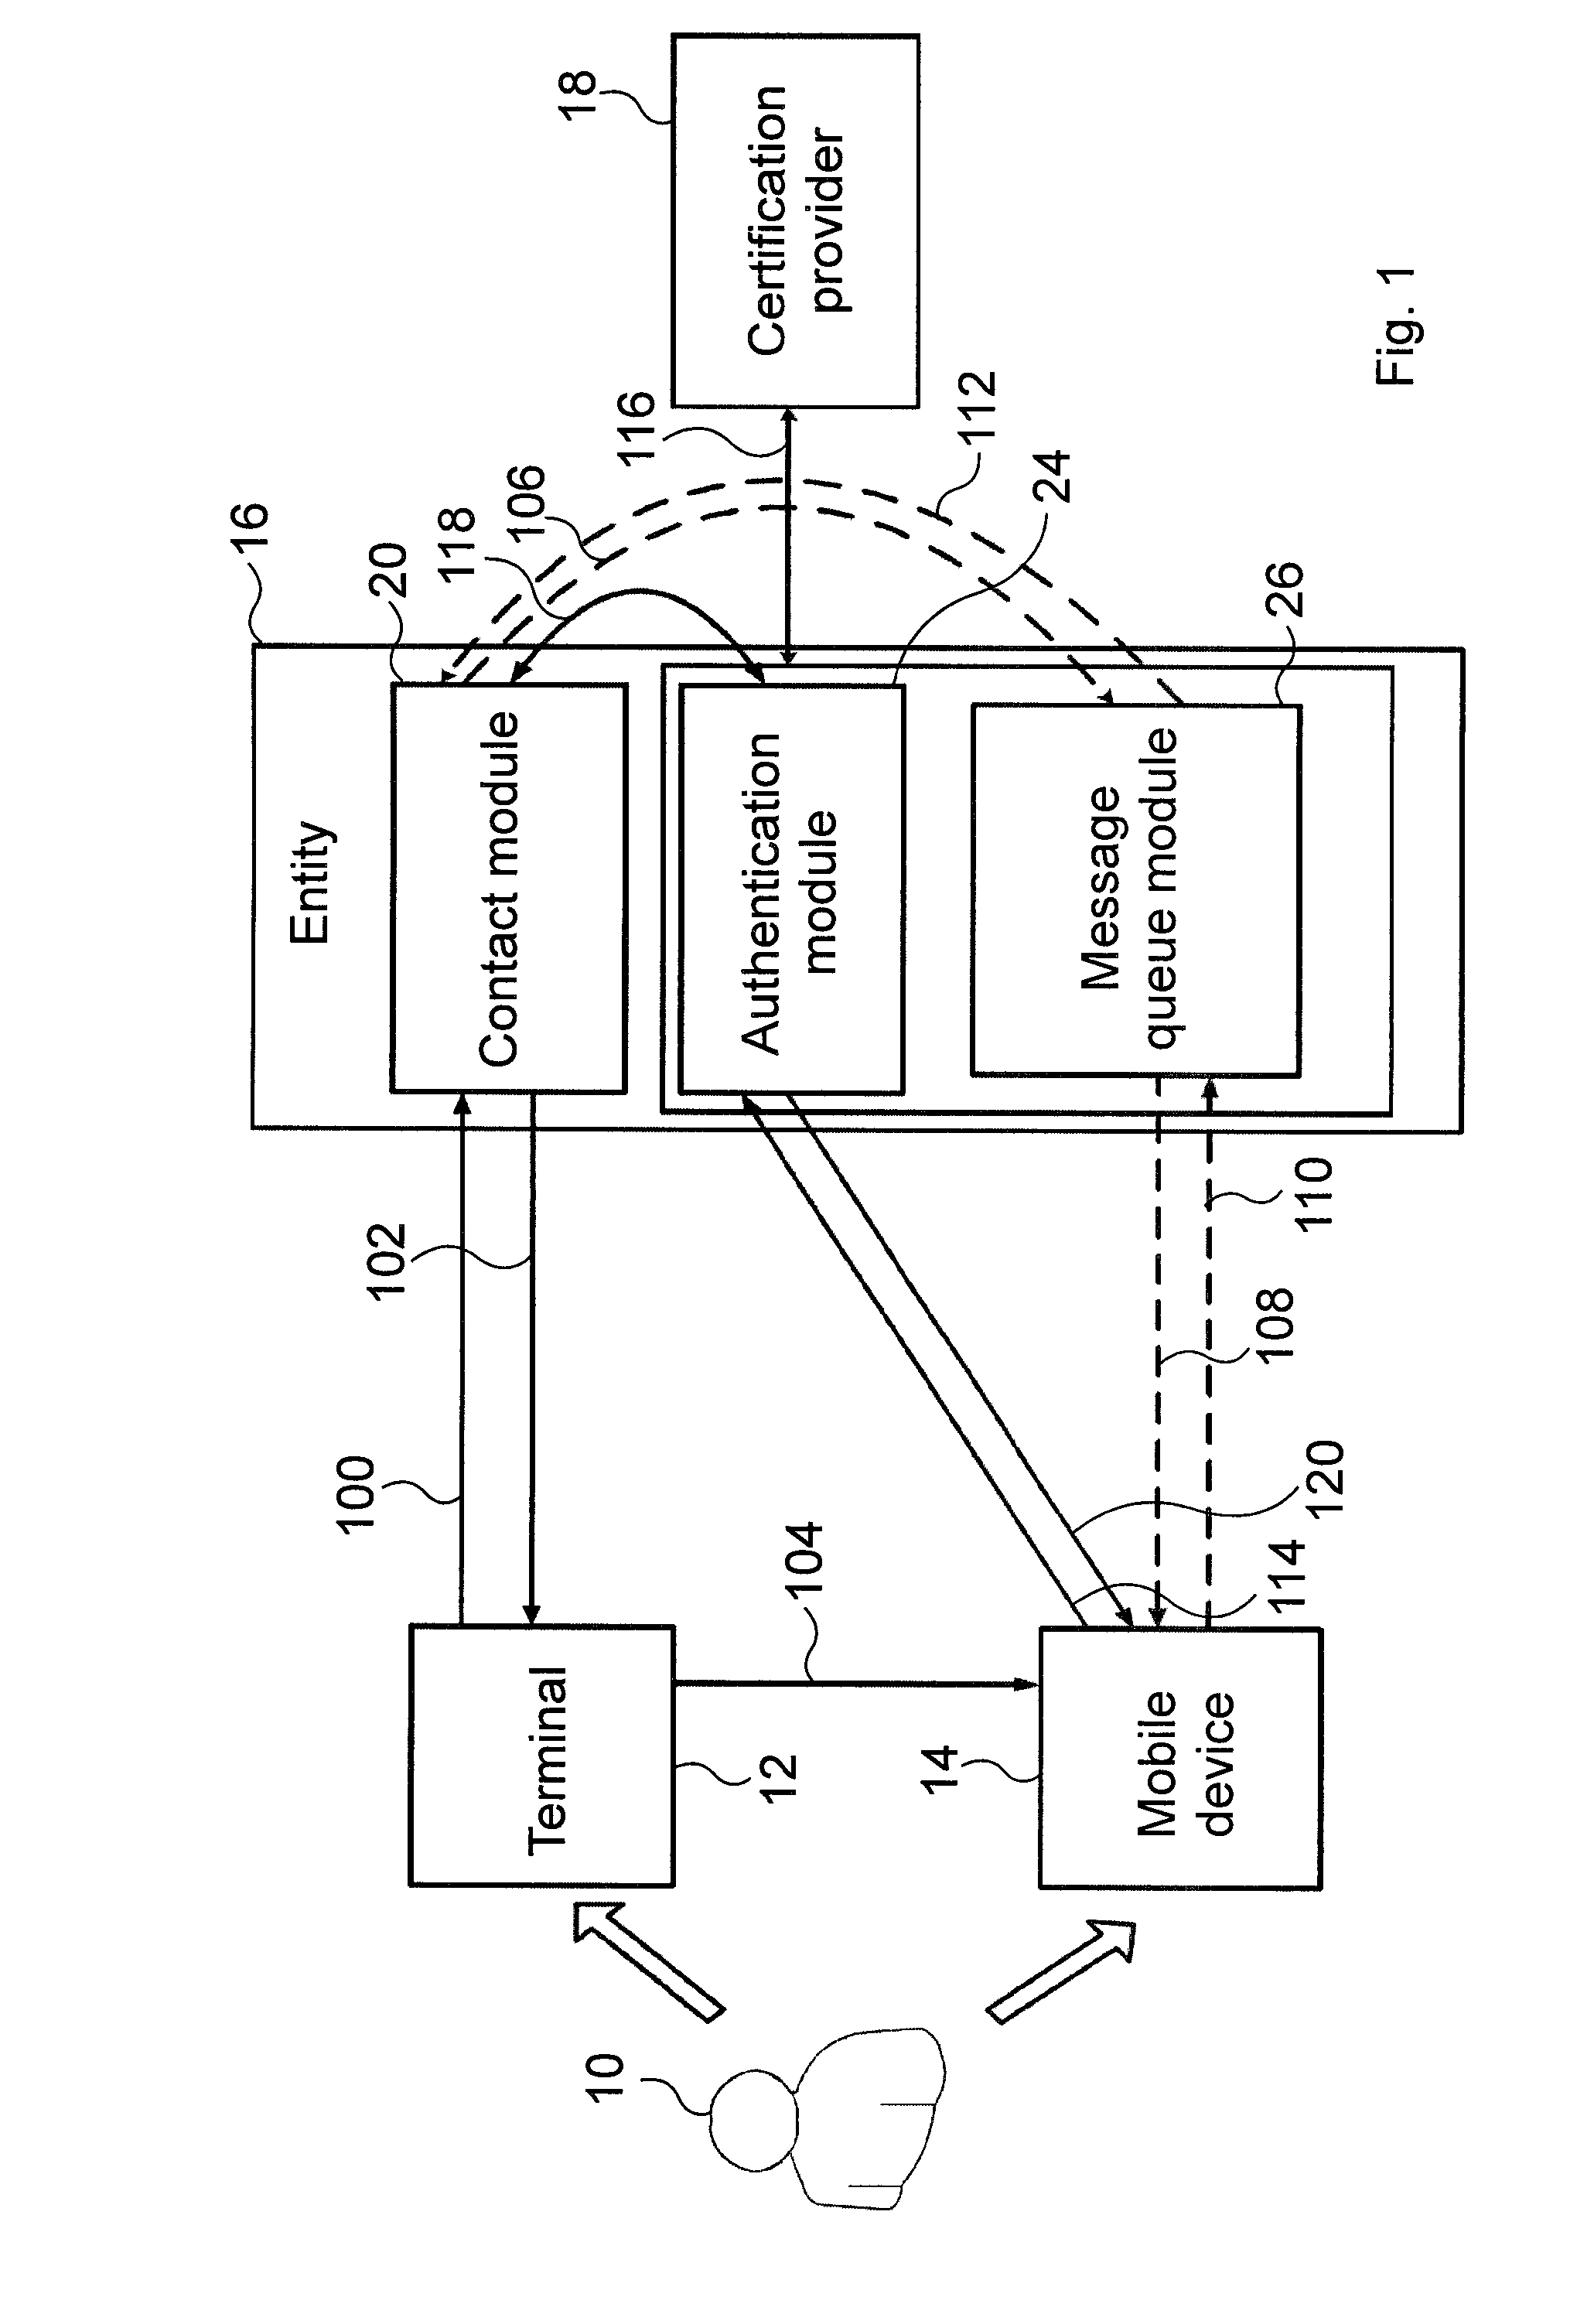 Method And System For Authenticating A User